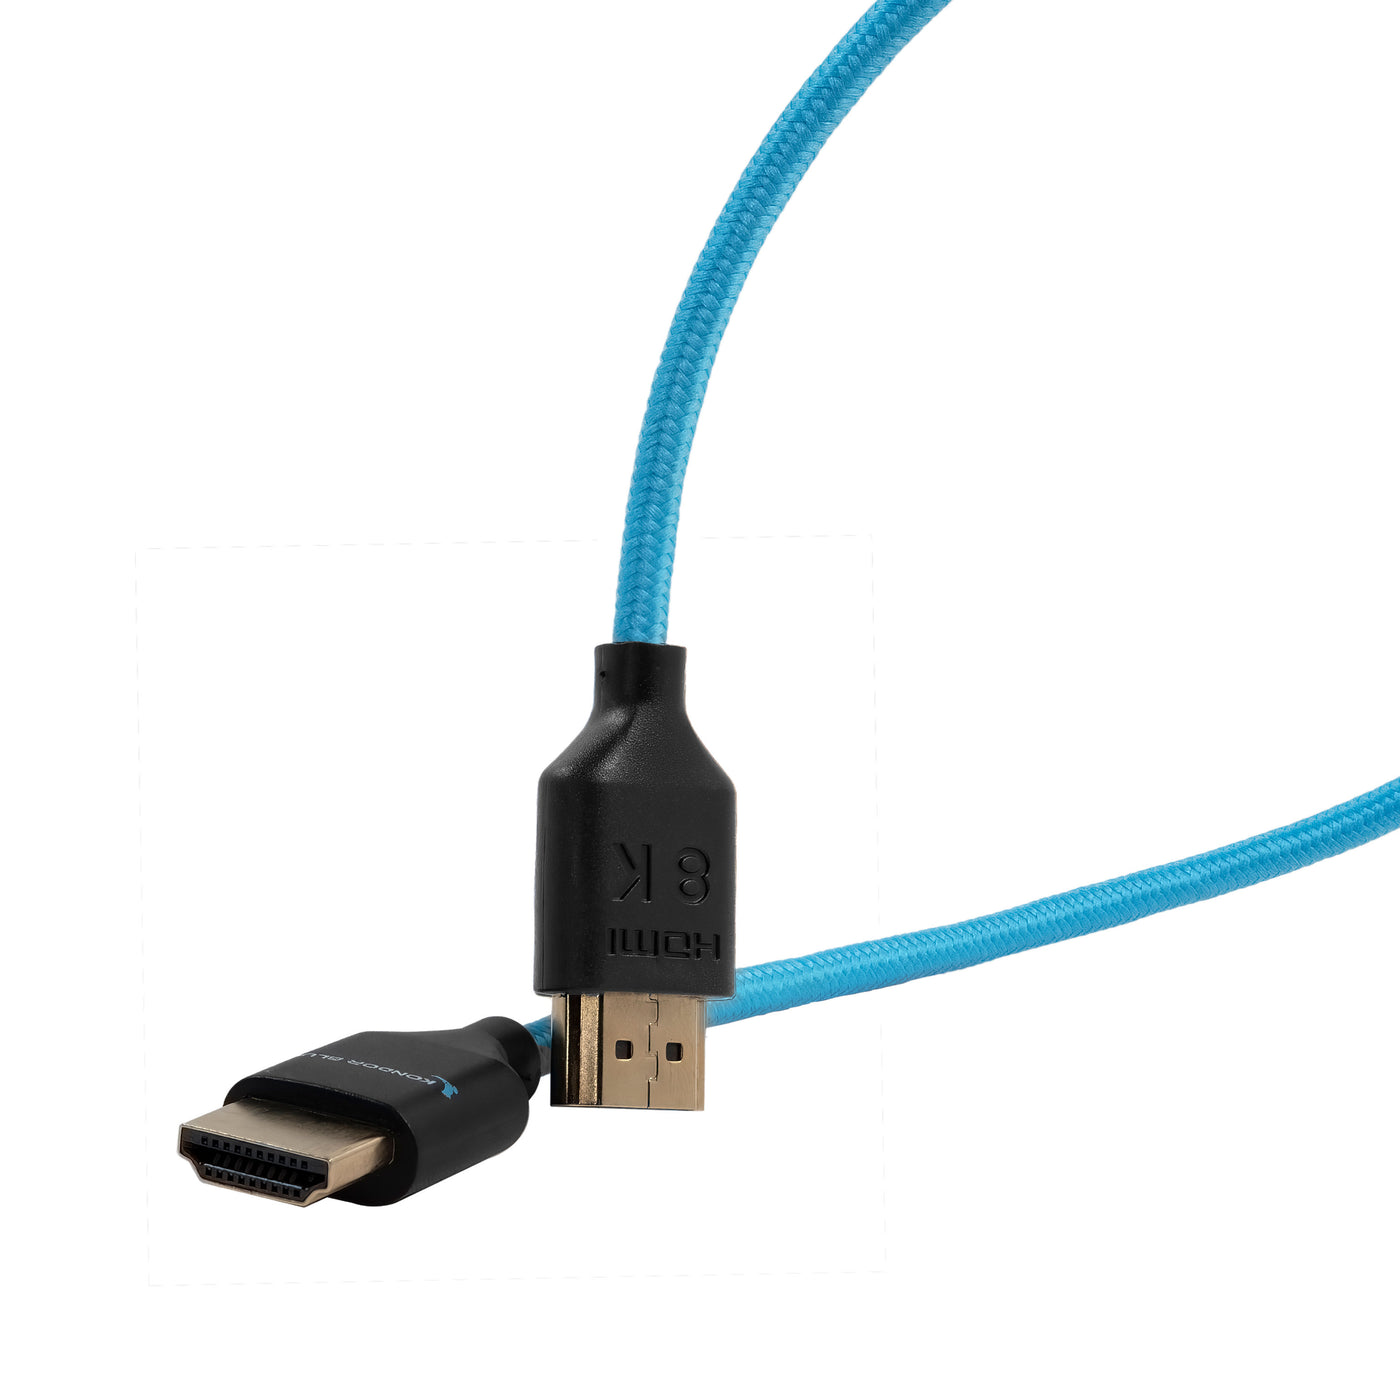 HDMI2.1BRD-003, ProXtend HDMI 2.1 8K BRAIDED Cable 3M